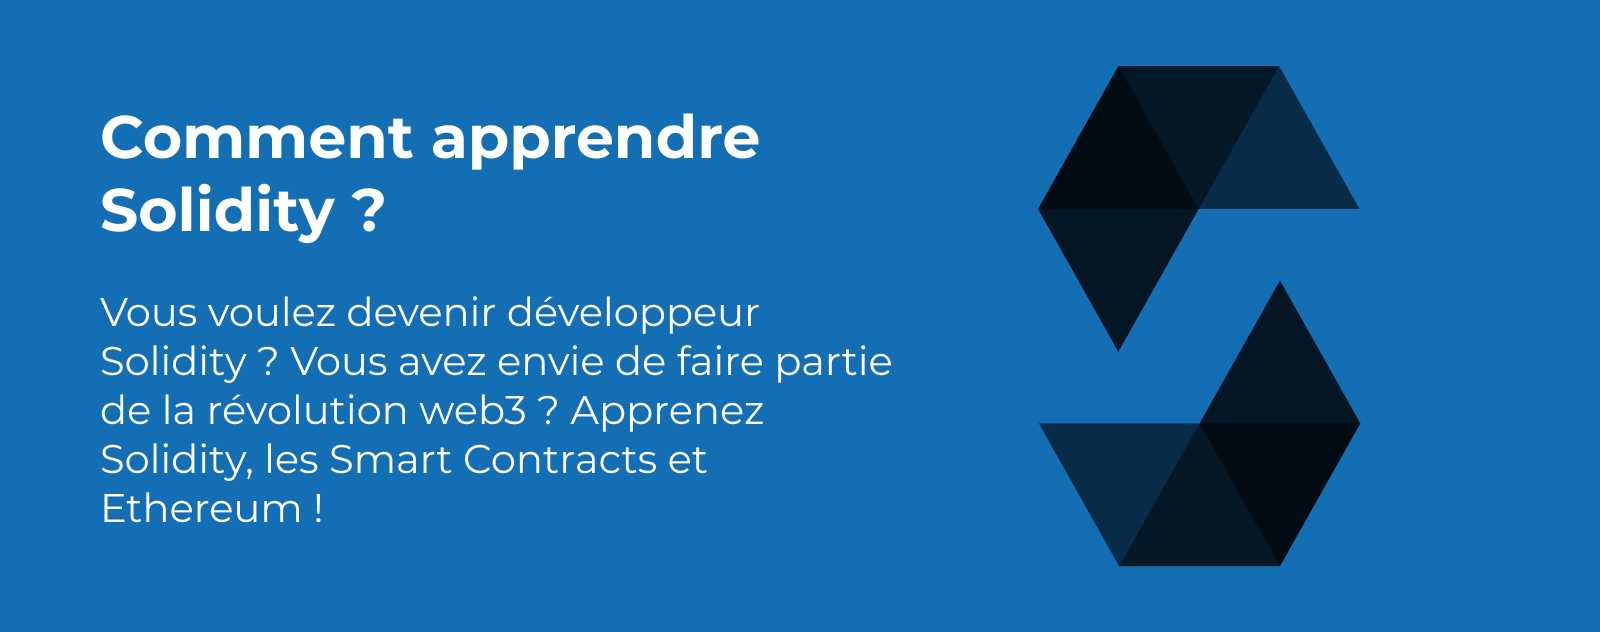 Comment apprendre Solidity ?